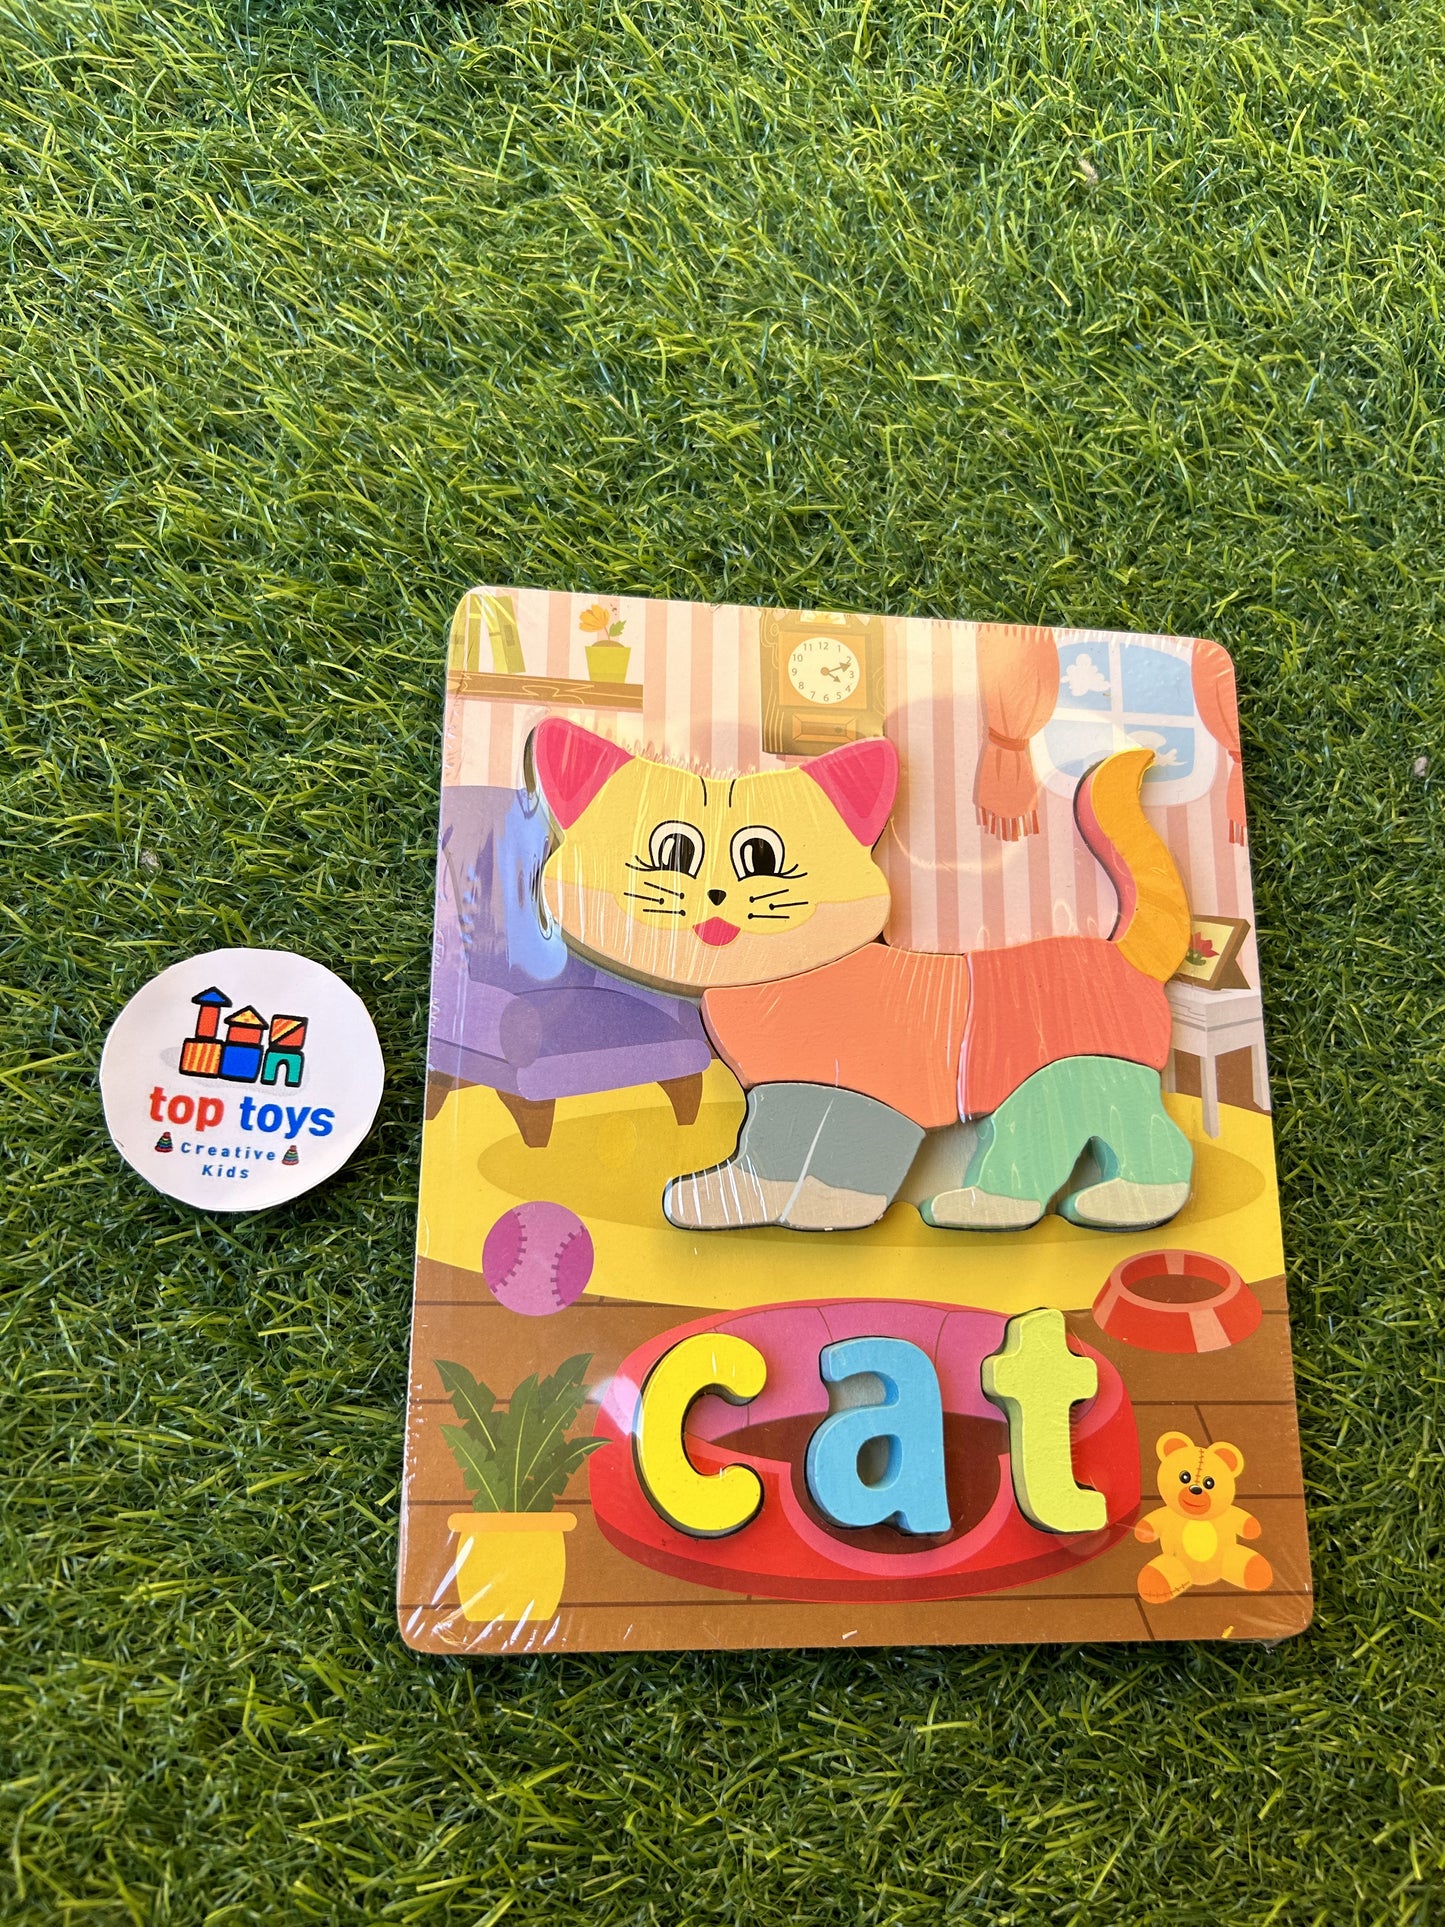 Wooden Puzzle Shapes with Names